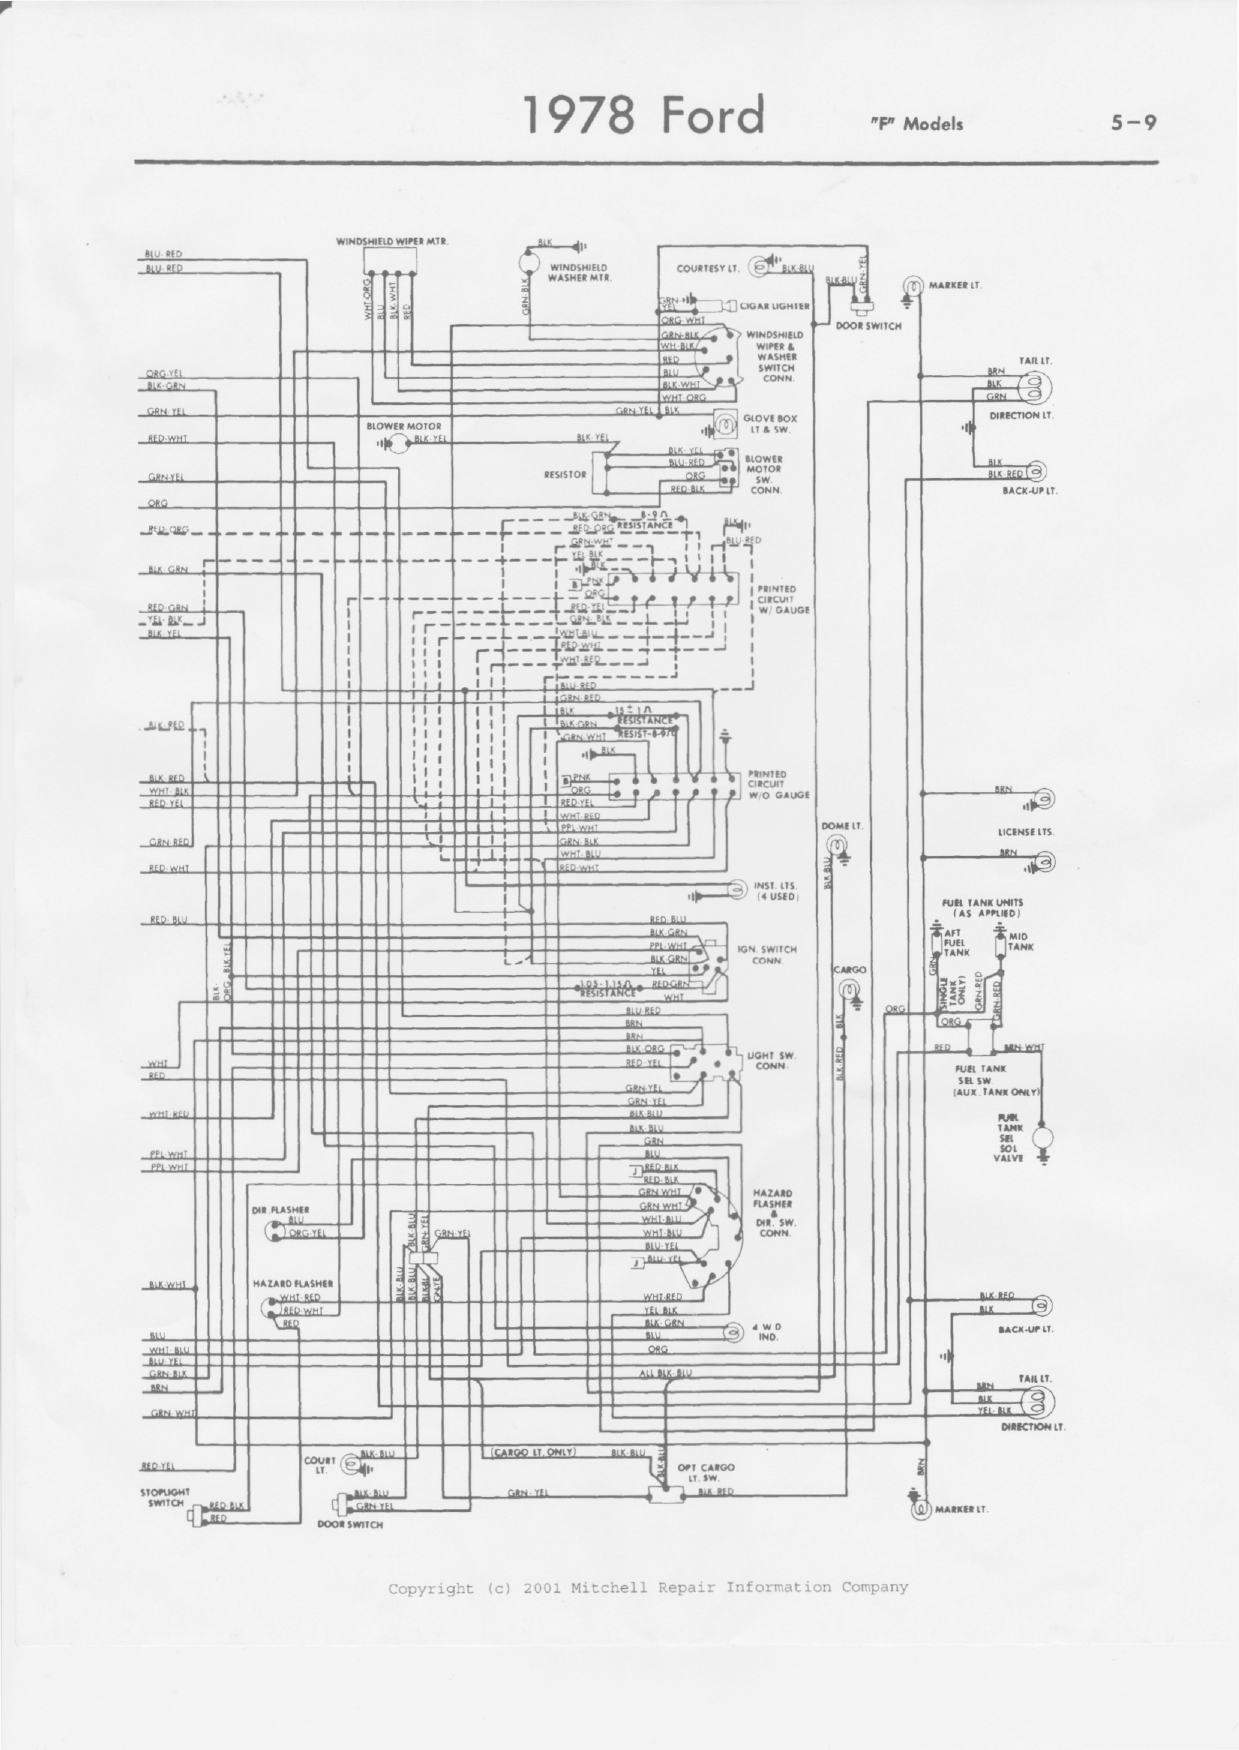 1979 Ford F150 Tail Light Wiring Diagram - Wiring Diagram